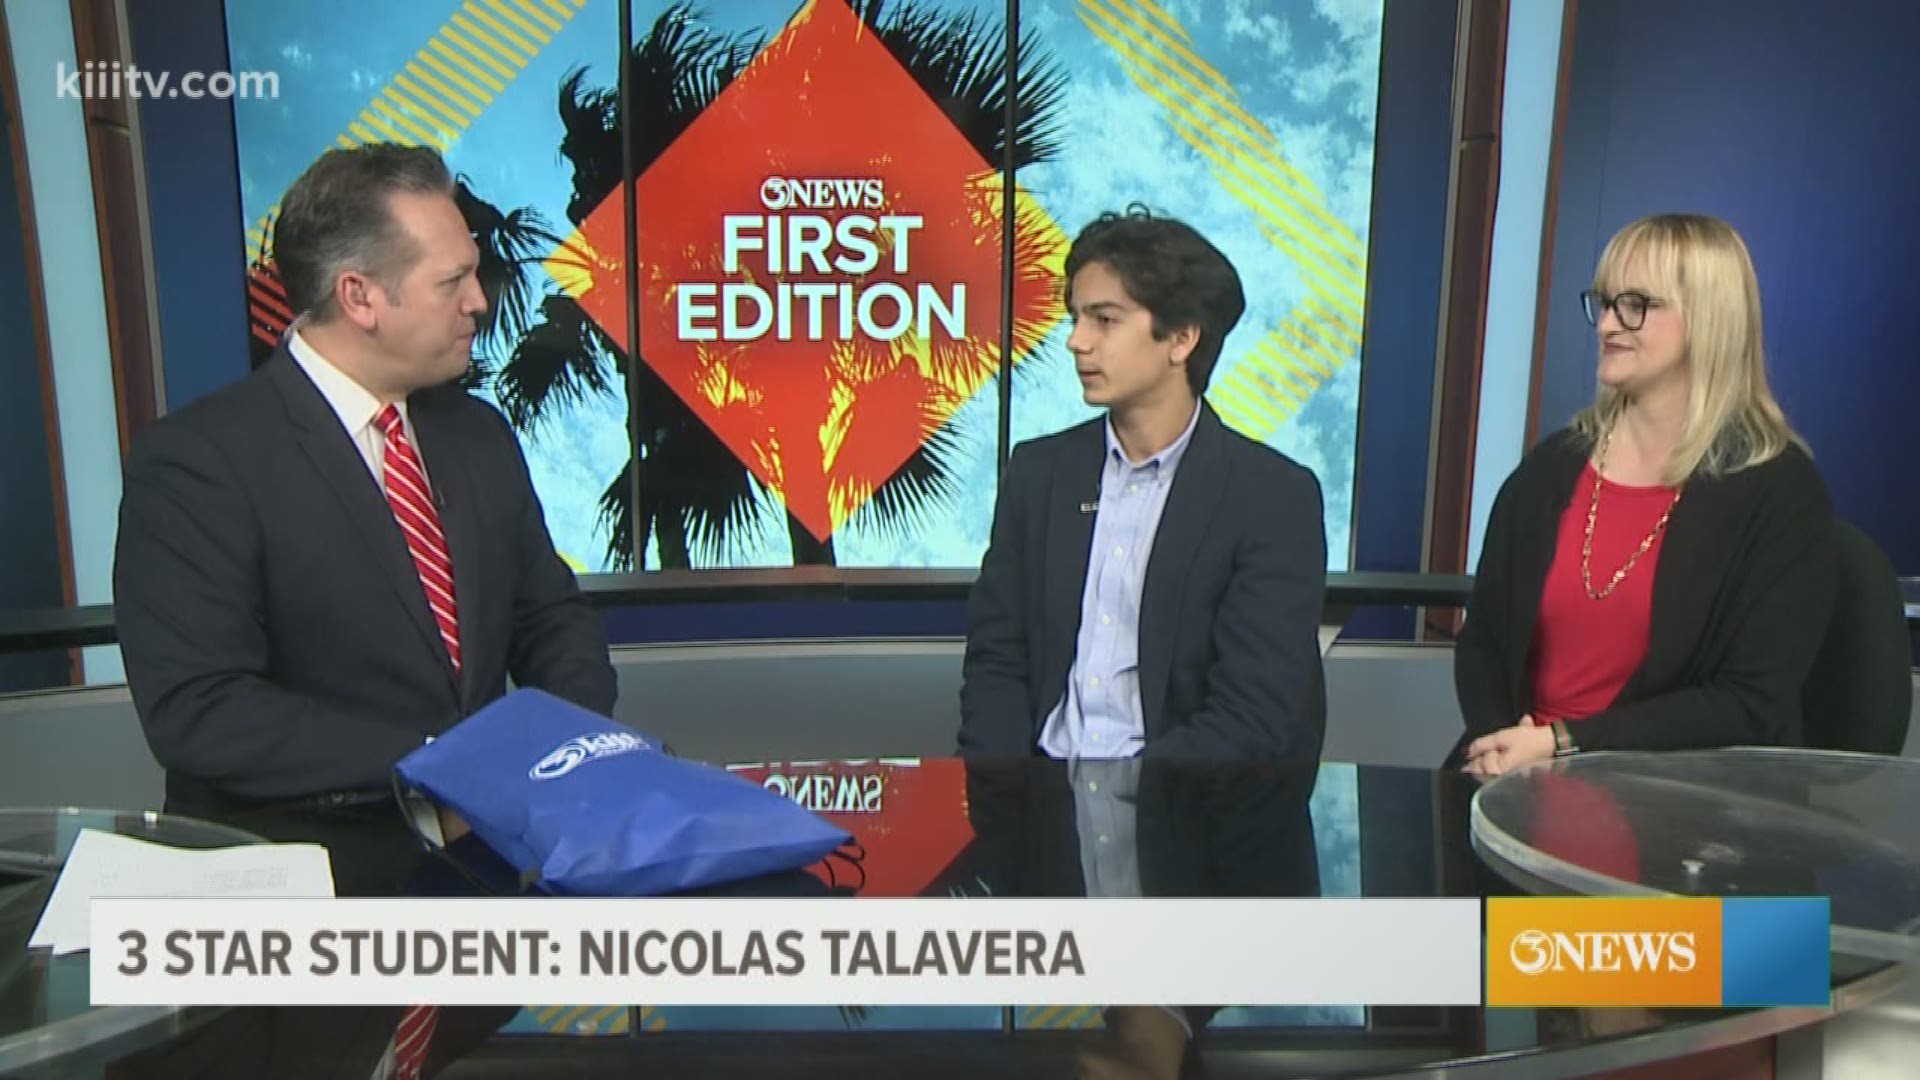 At the age of 14, Nicholas Talavera already knows that he loves math, history and art. What he wants to do next is learn about philosophy and engineering.